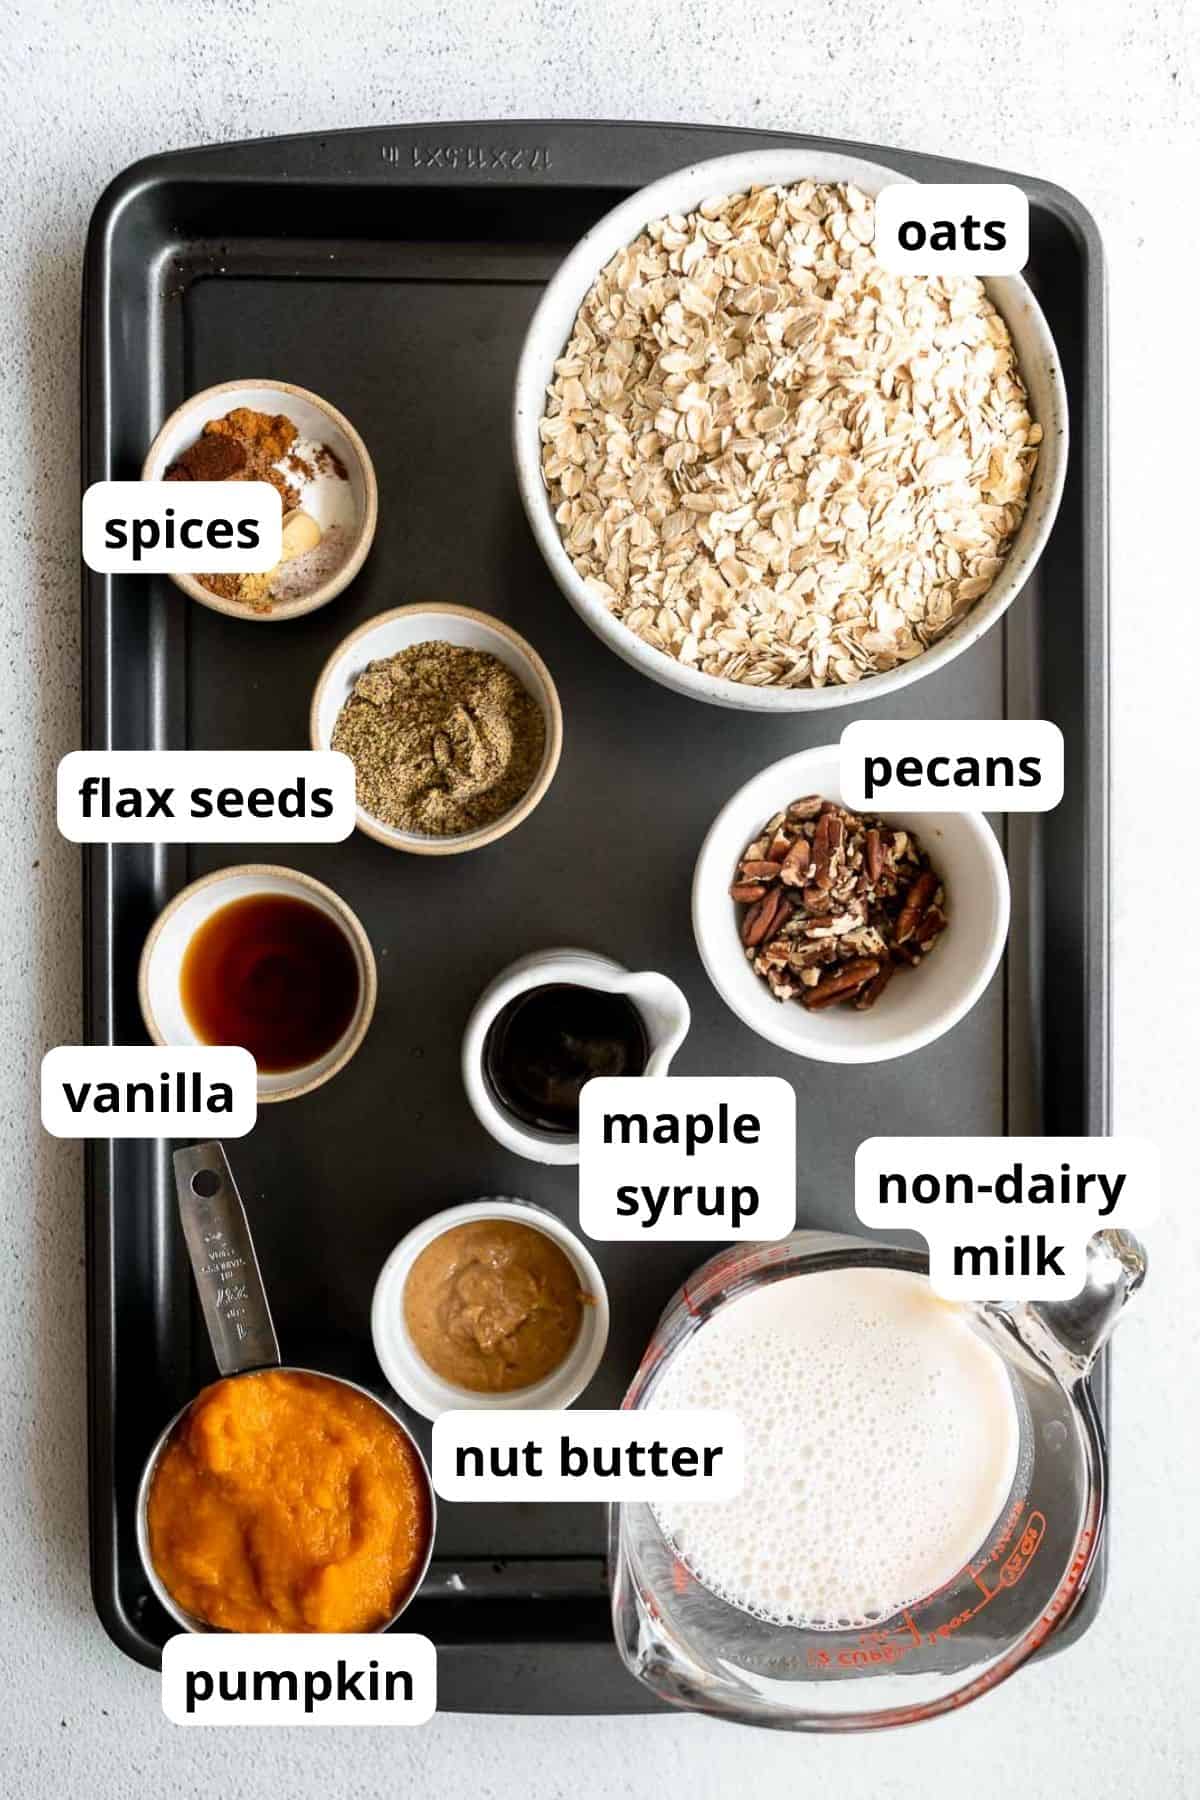 ingredients for the recipe with labels